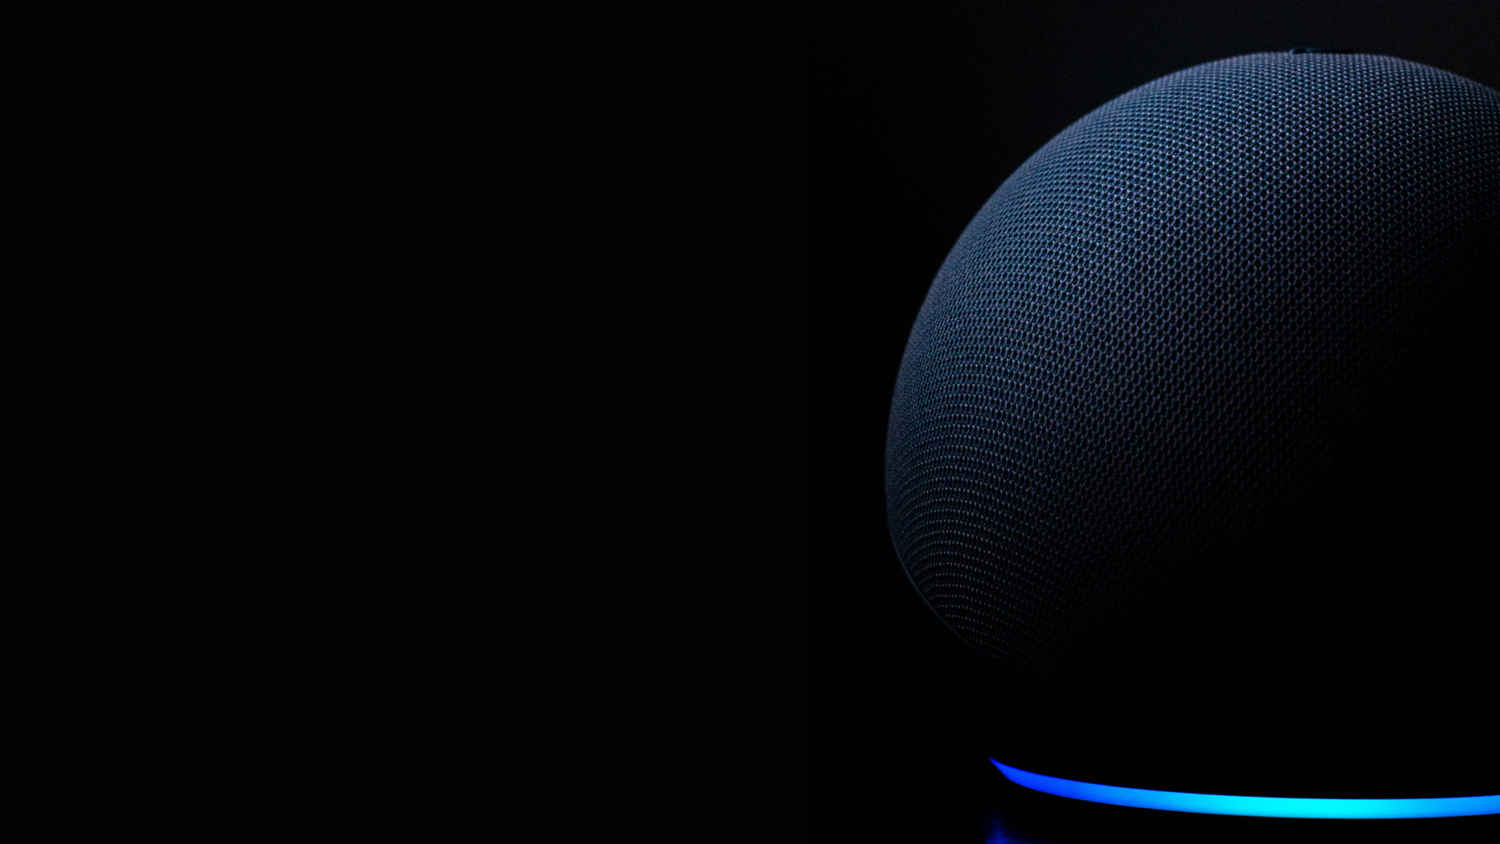 Amazon Alexa reportedly getting AI features, but you might have to pay for them